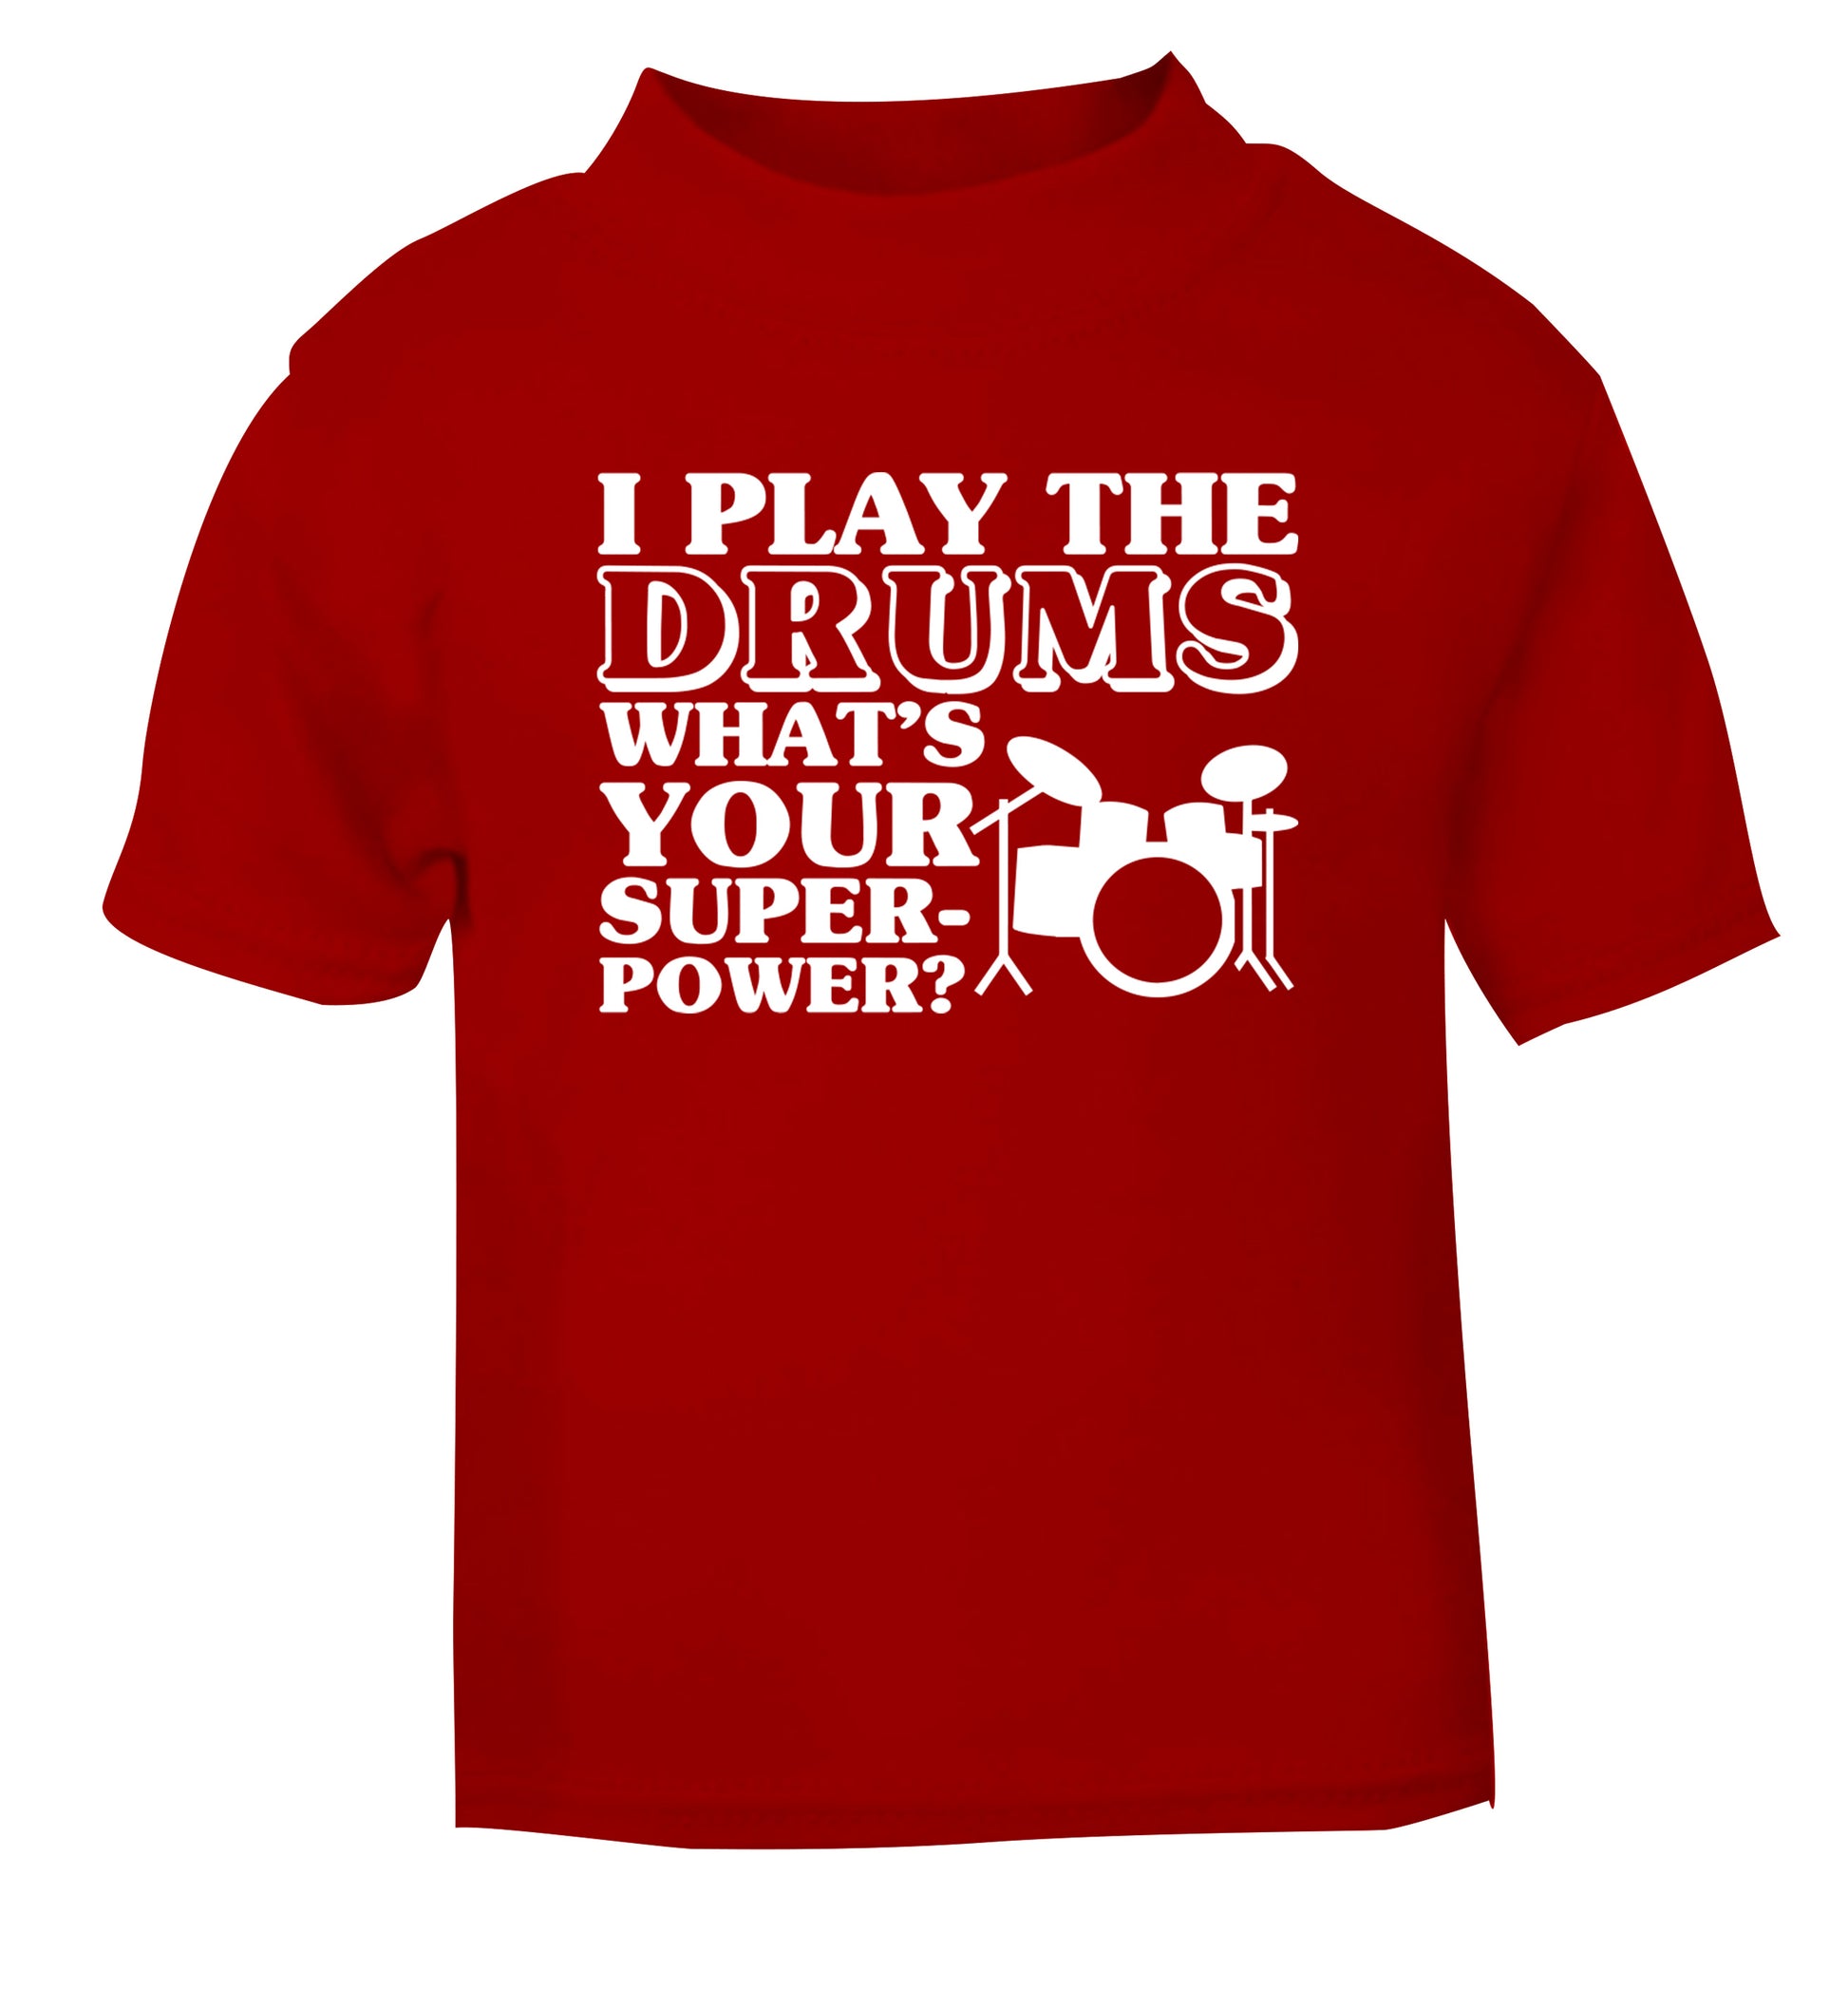 I play the drums what's your superpower? red Baby Toddler Tshirt 2 Years